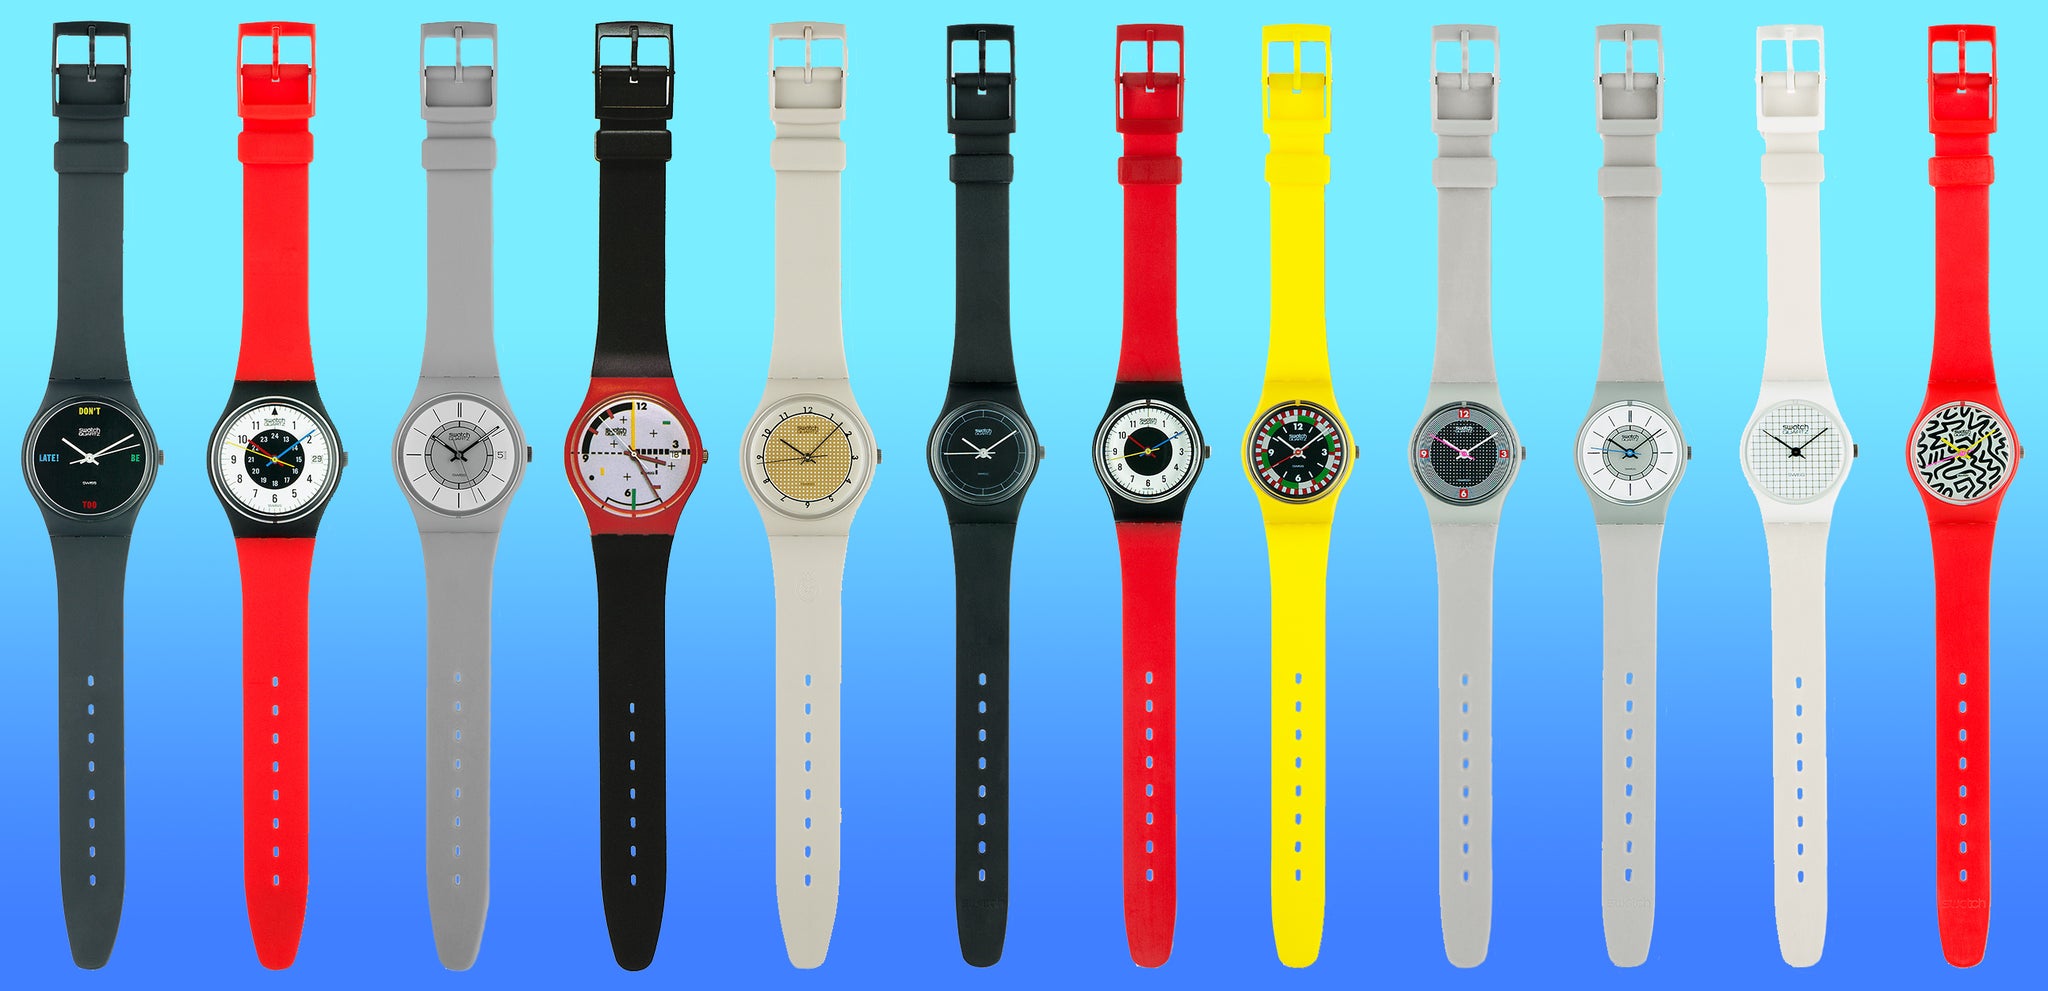 Malaysia bans LGBTQ-themed Swatch watches